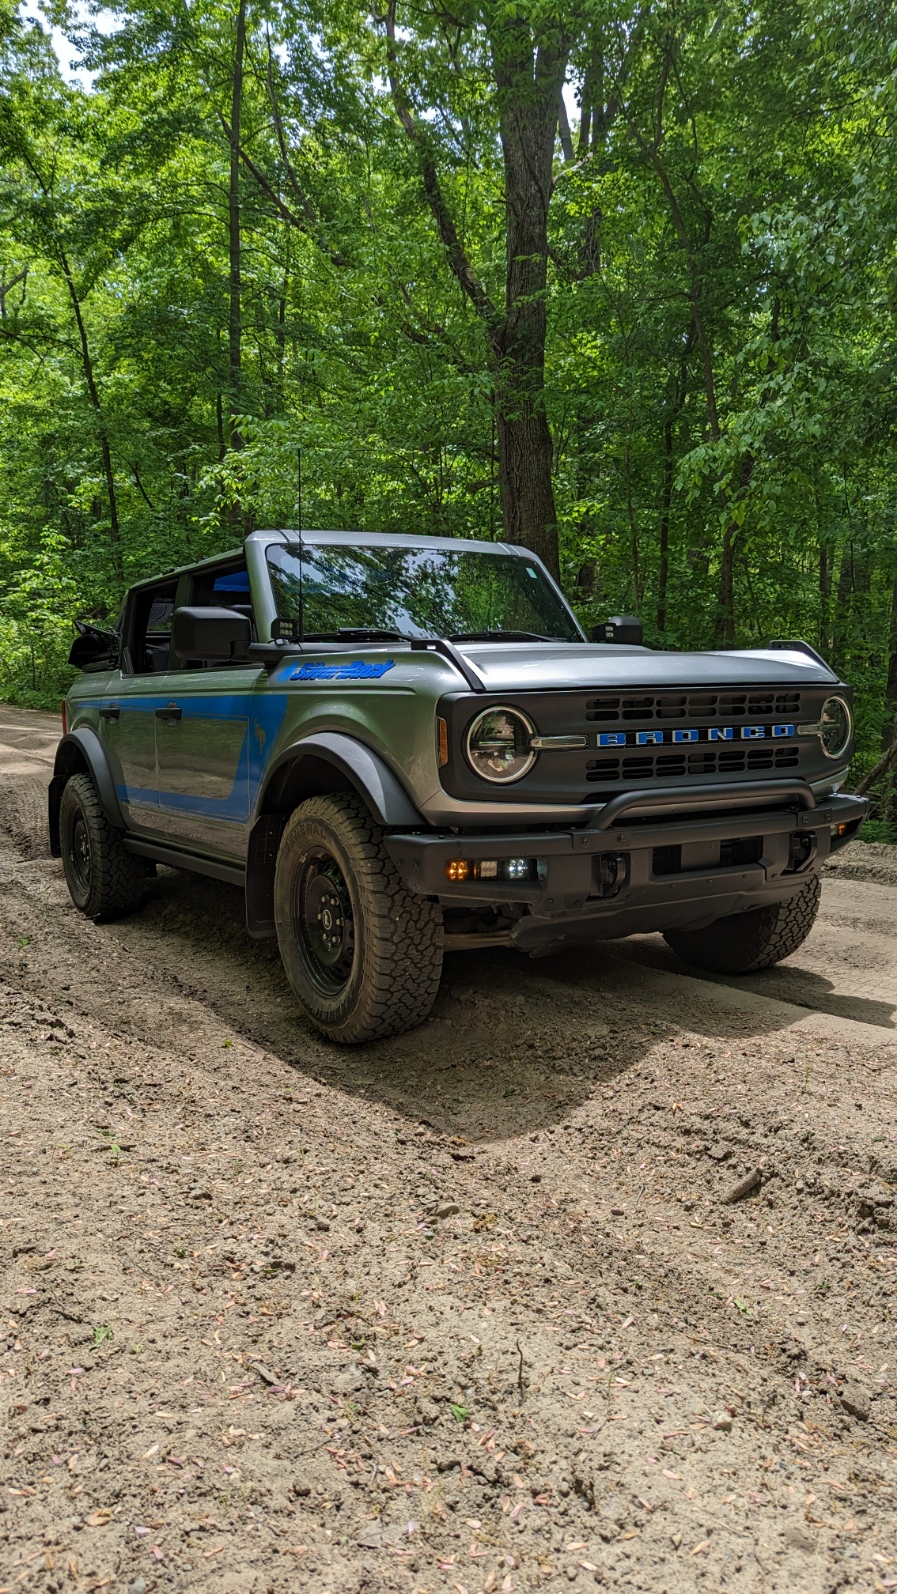 Installed 33 inch tires on stock Base rims - no mods required  Bronco6G -  2021+ Ford Bronco & Bronco Raptor Forum, News, Blog & Owners Community